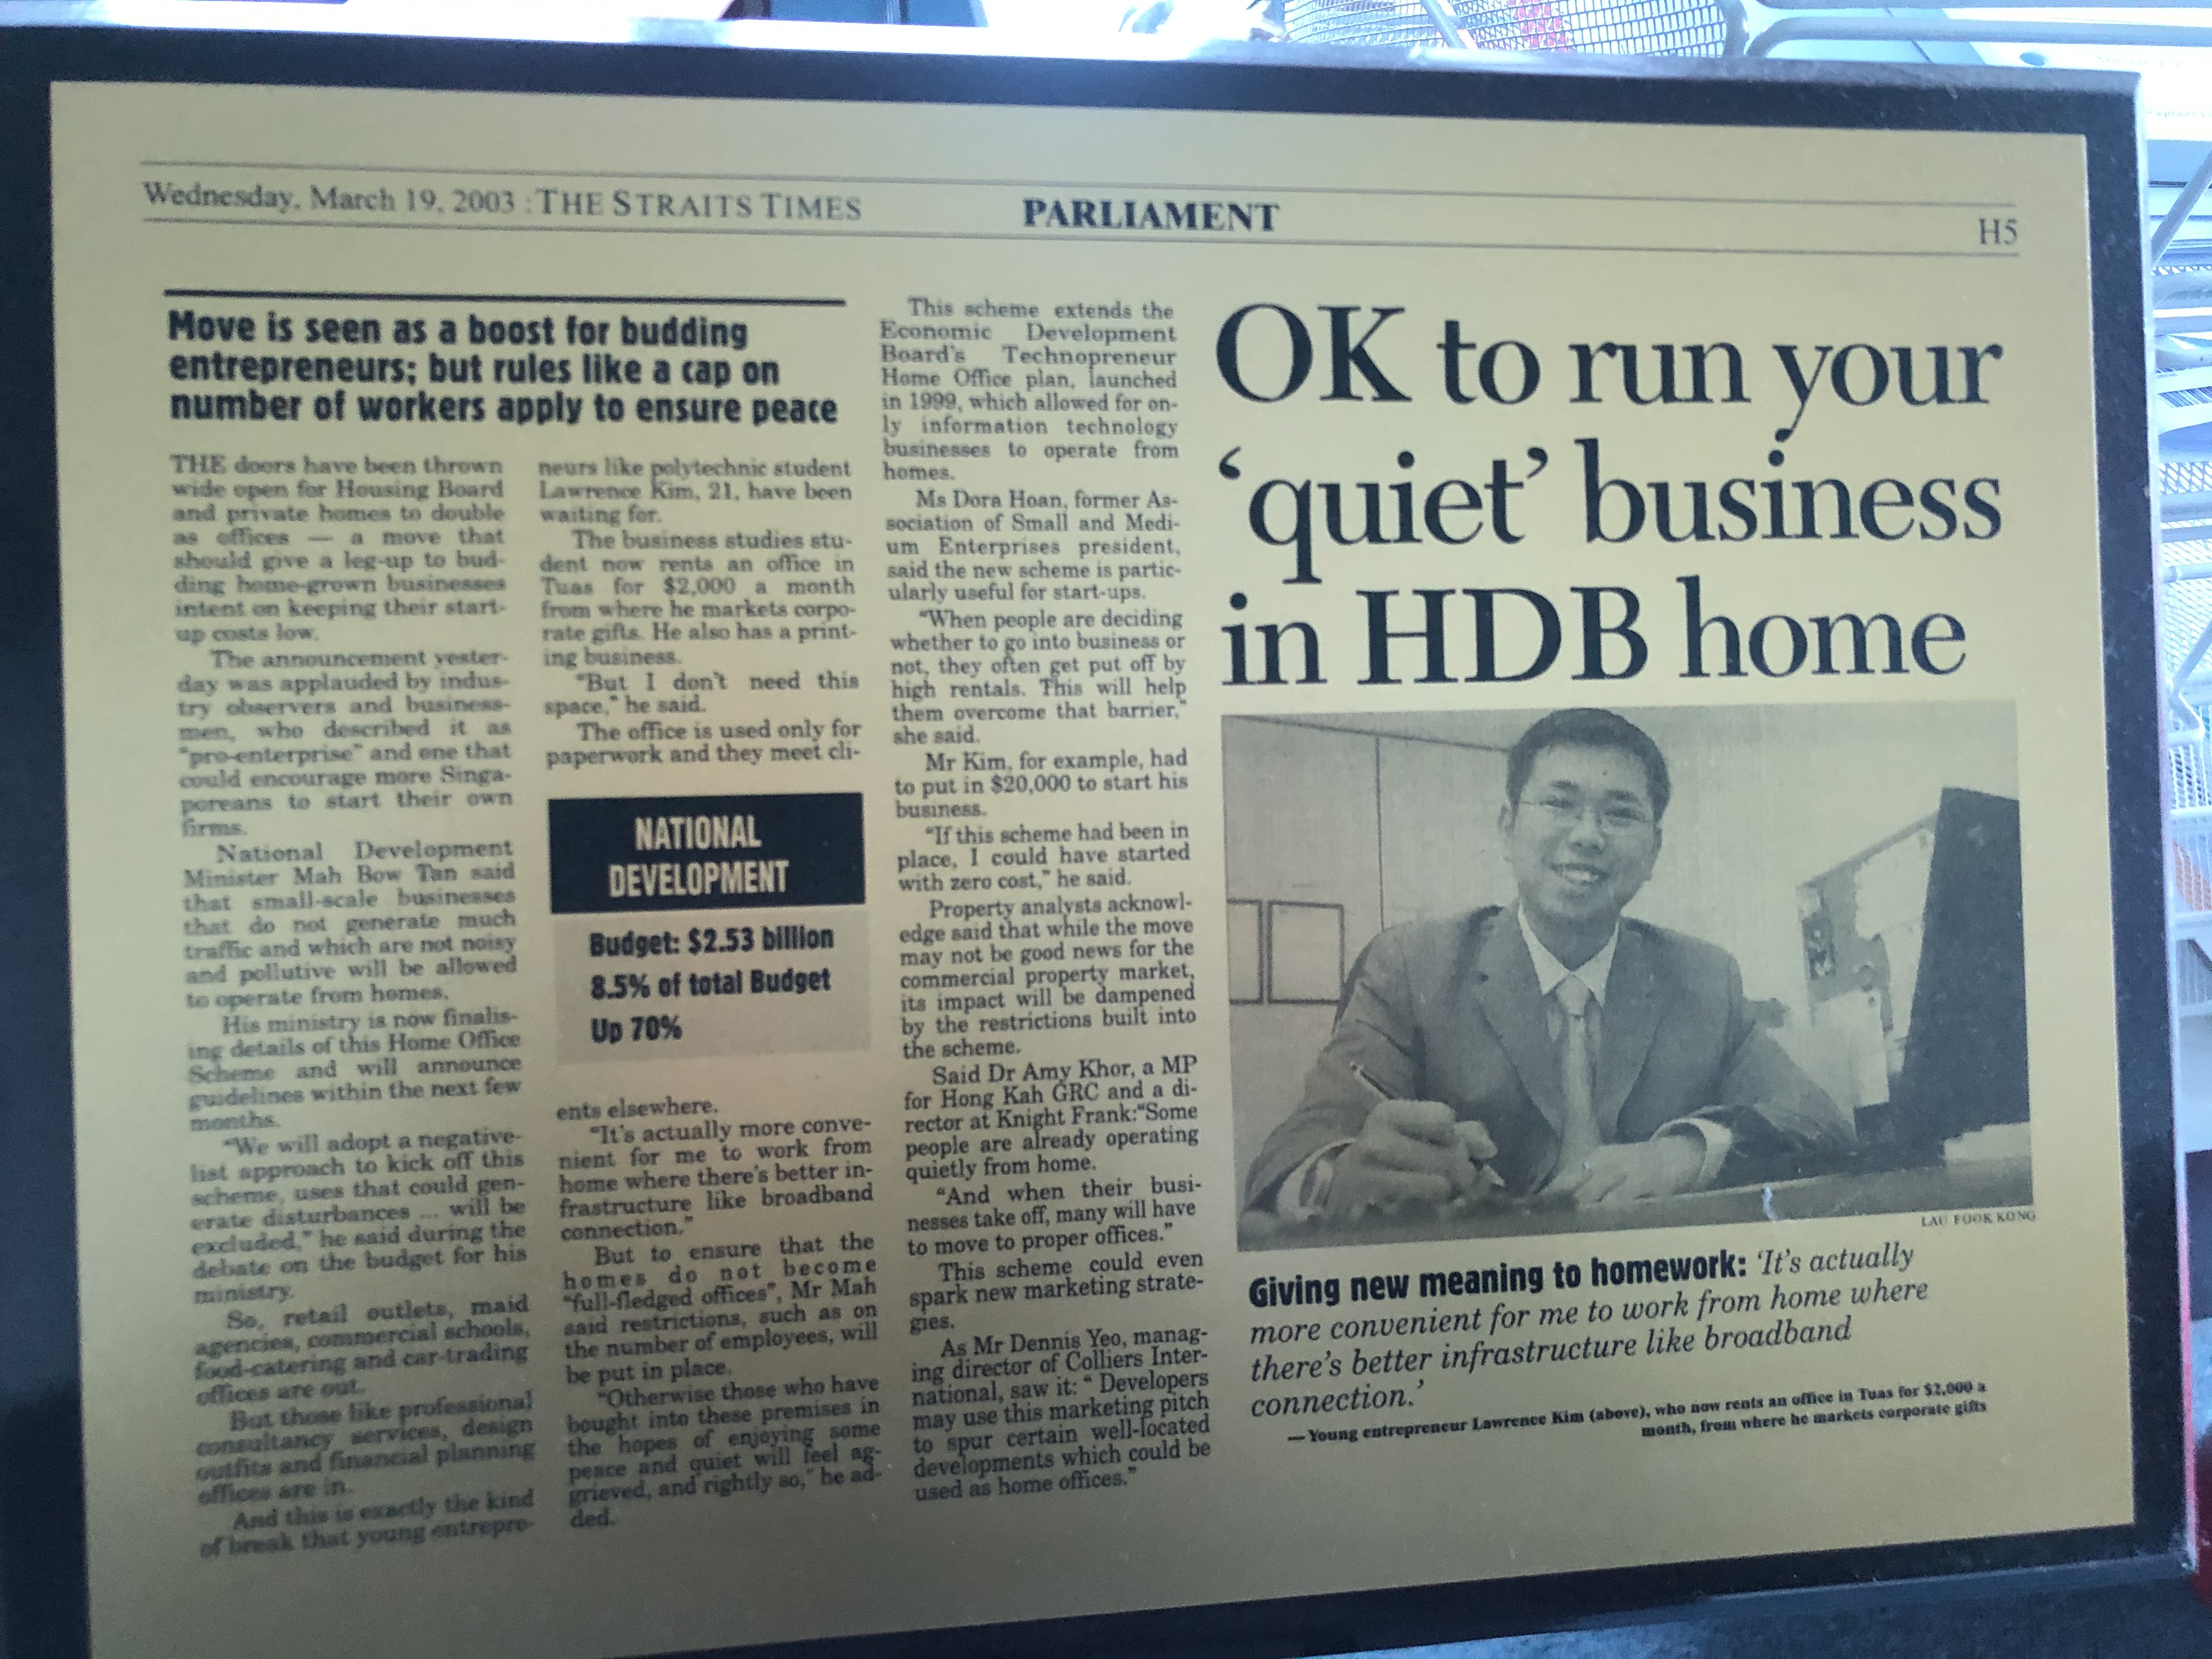 “OK to run your ‘quiet’ business in HDB home”